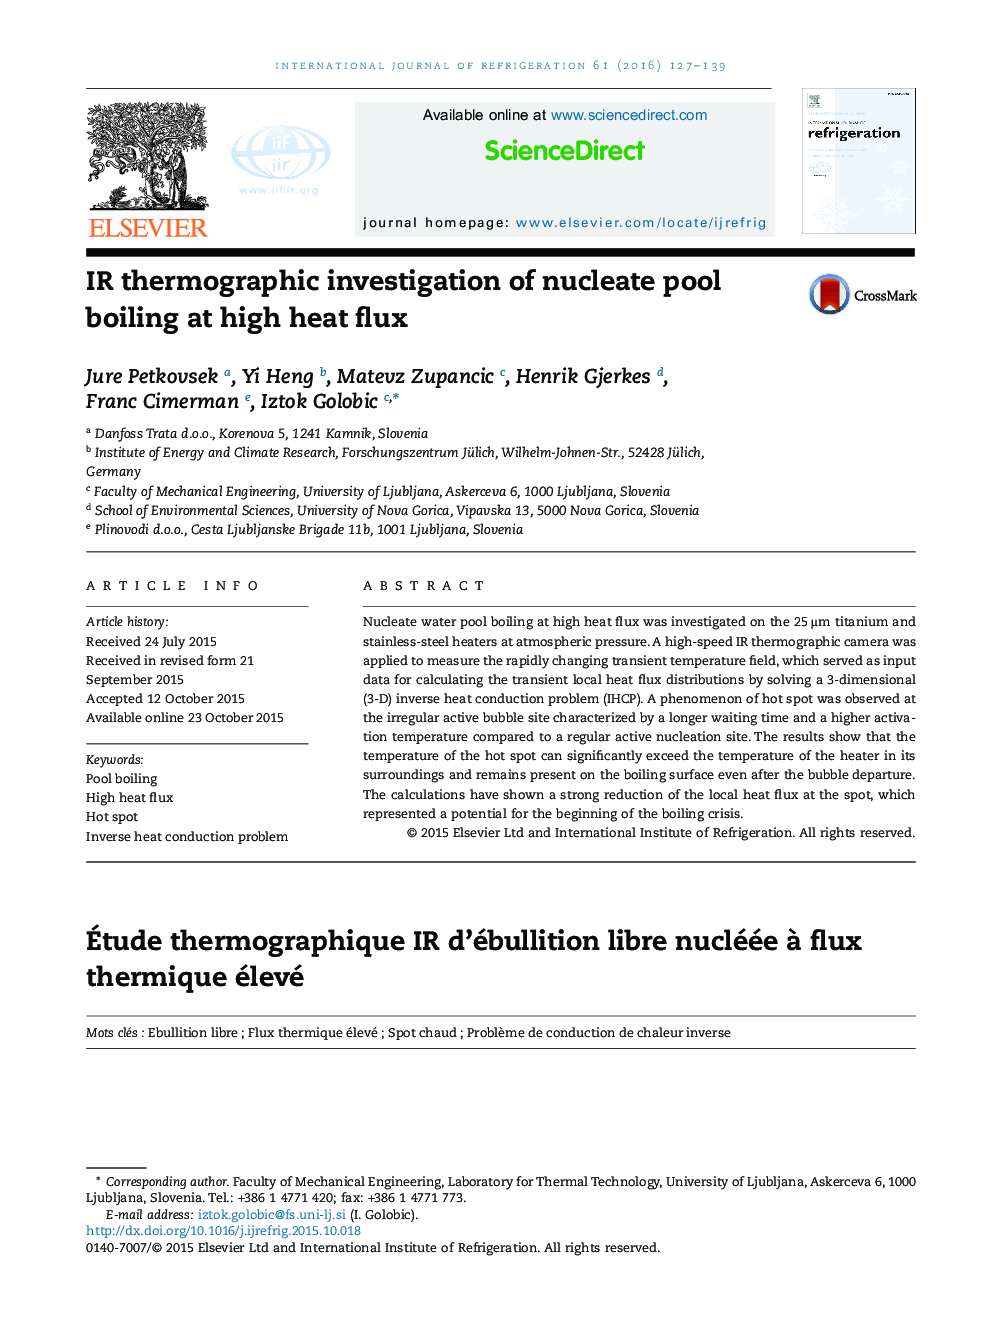 IR thermographic investigation of nucleate pool boiling at high heat flux